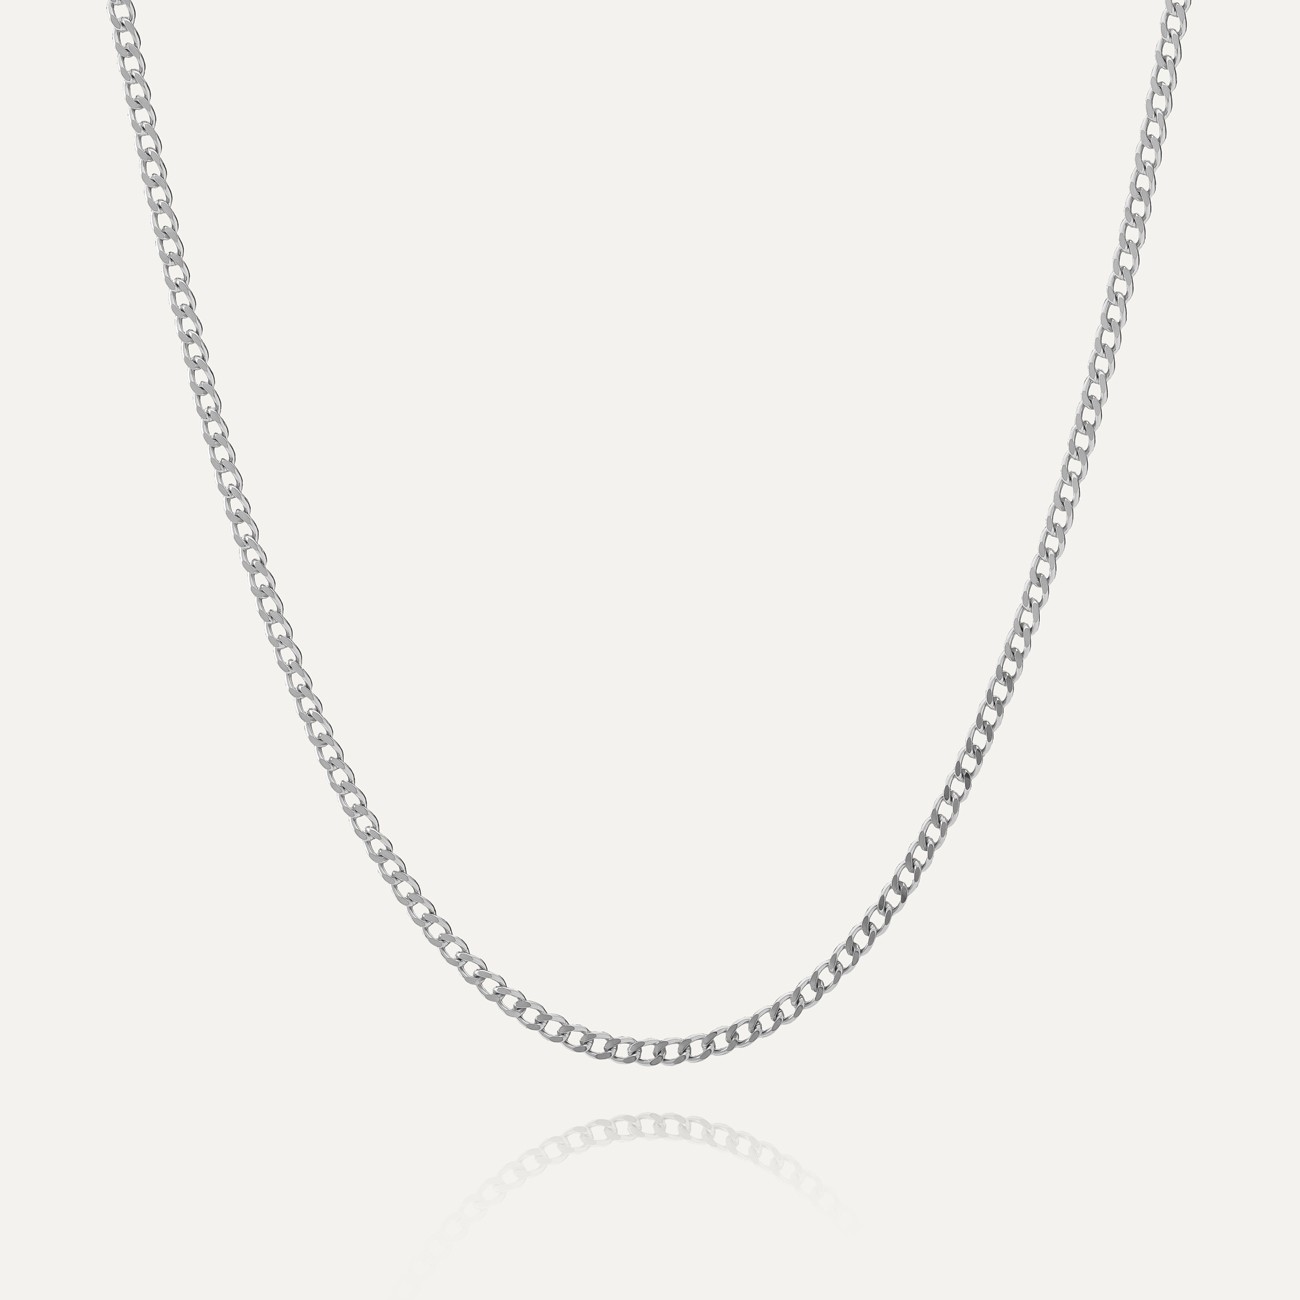 Curb chain sterling silver